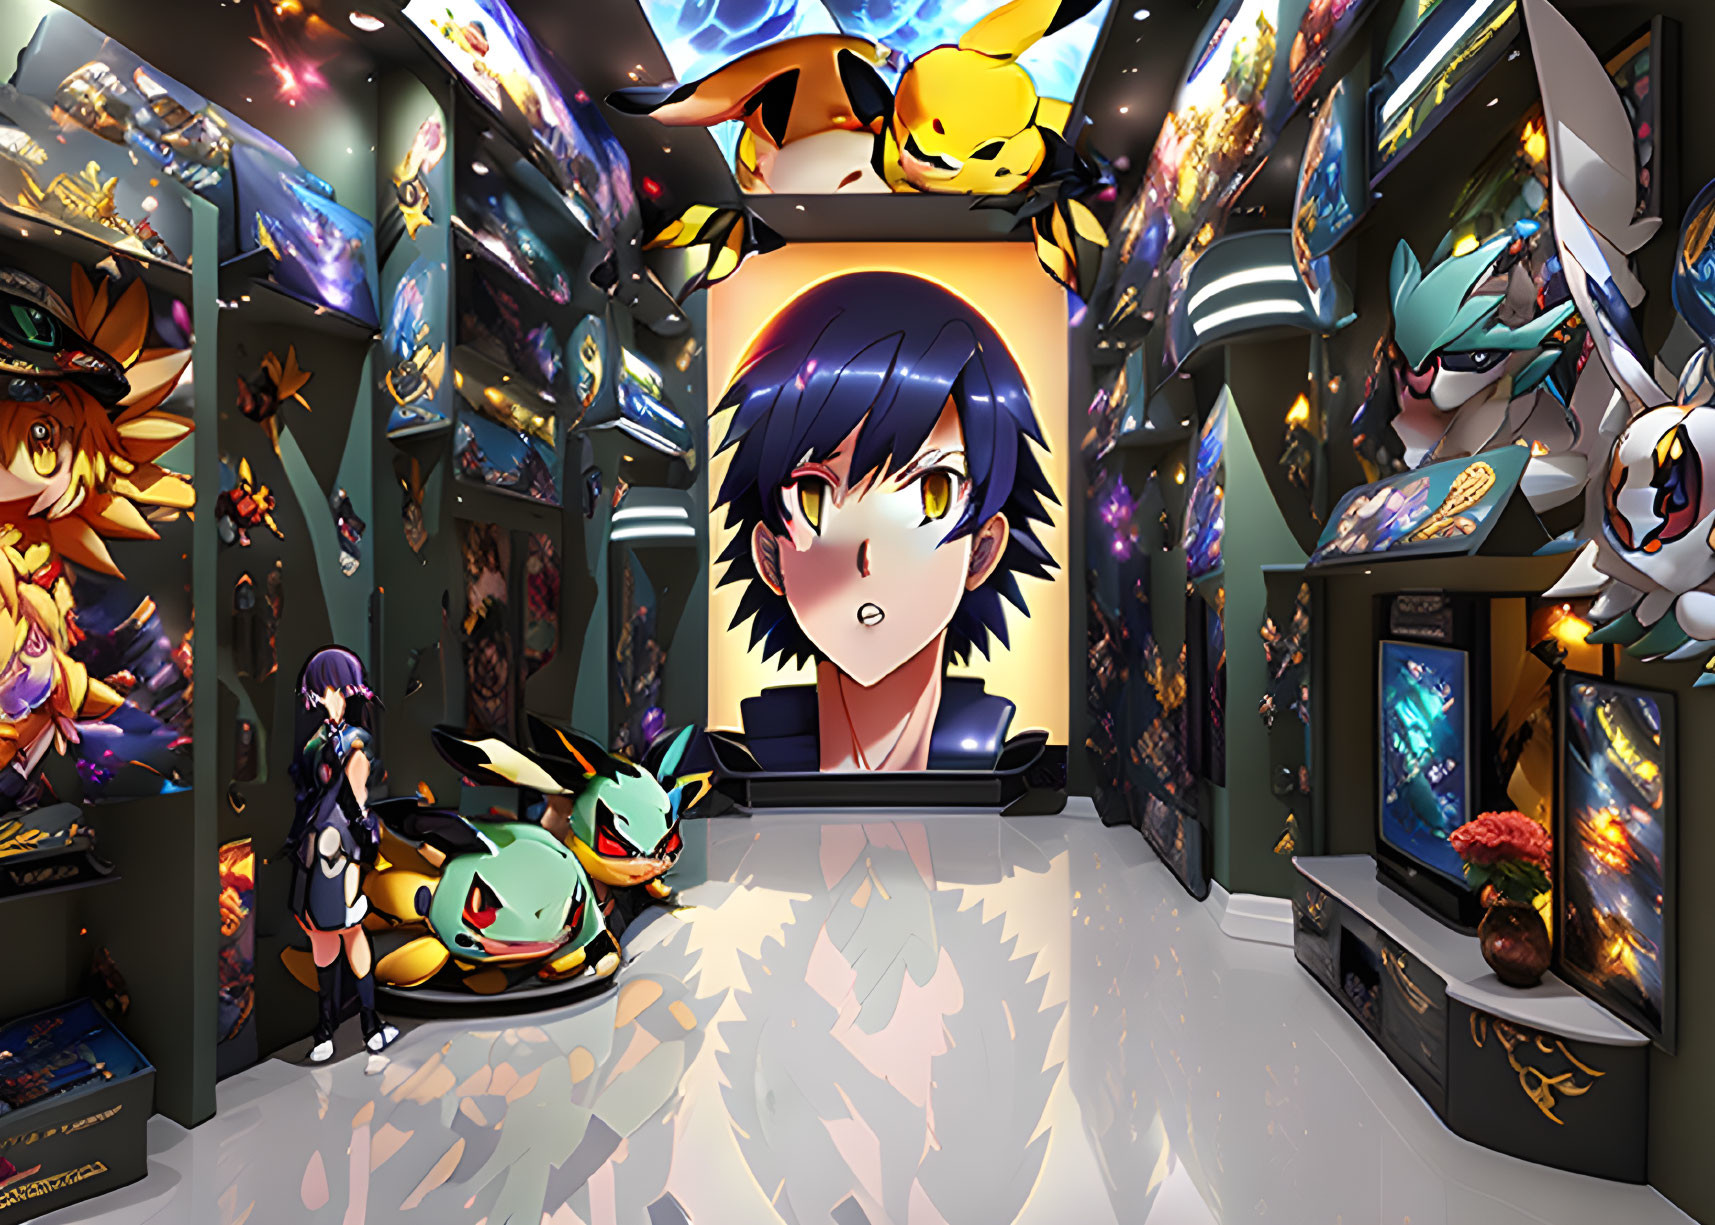 Colorful Anime Room with Collectibles, Posters, Figures